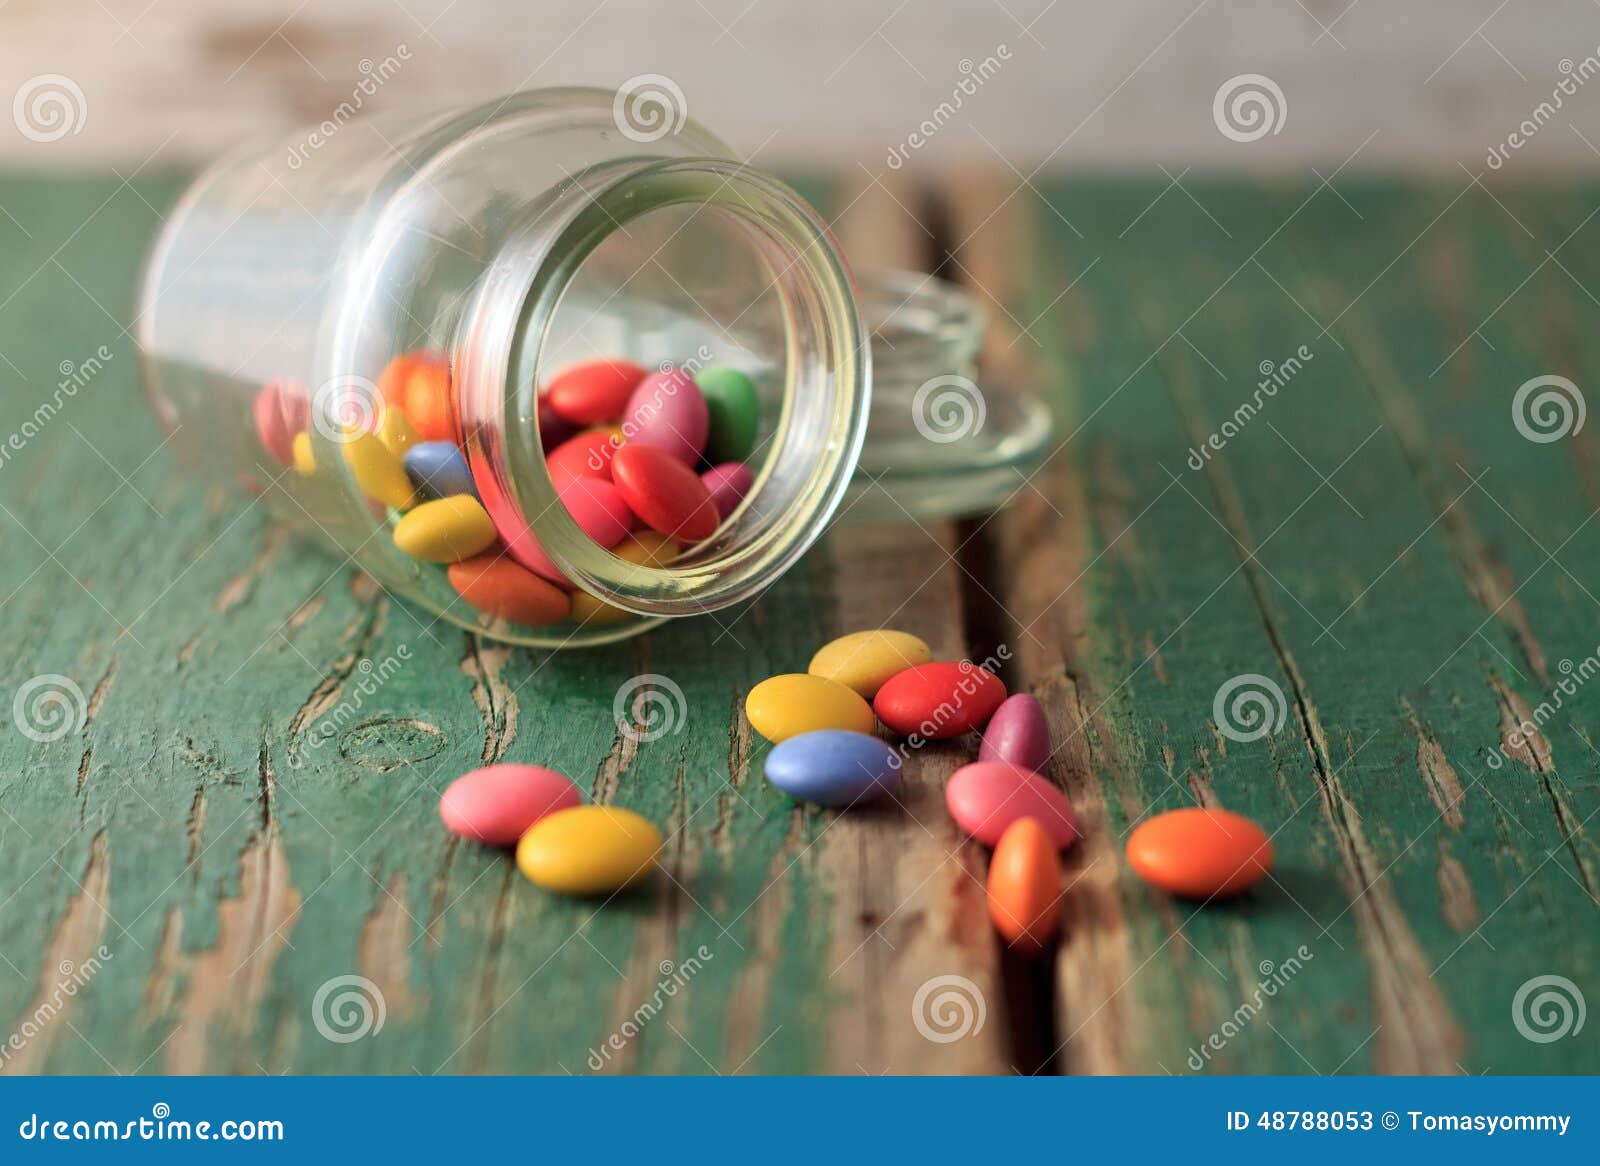 Spilled Chocolate Smarties on Green Wooden Board Stock Image - Image of ...